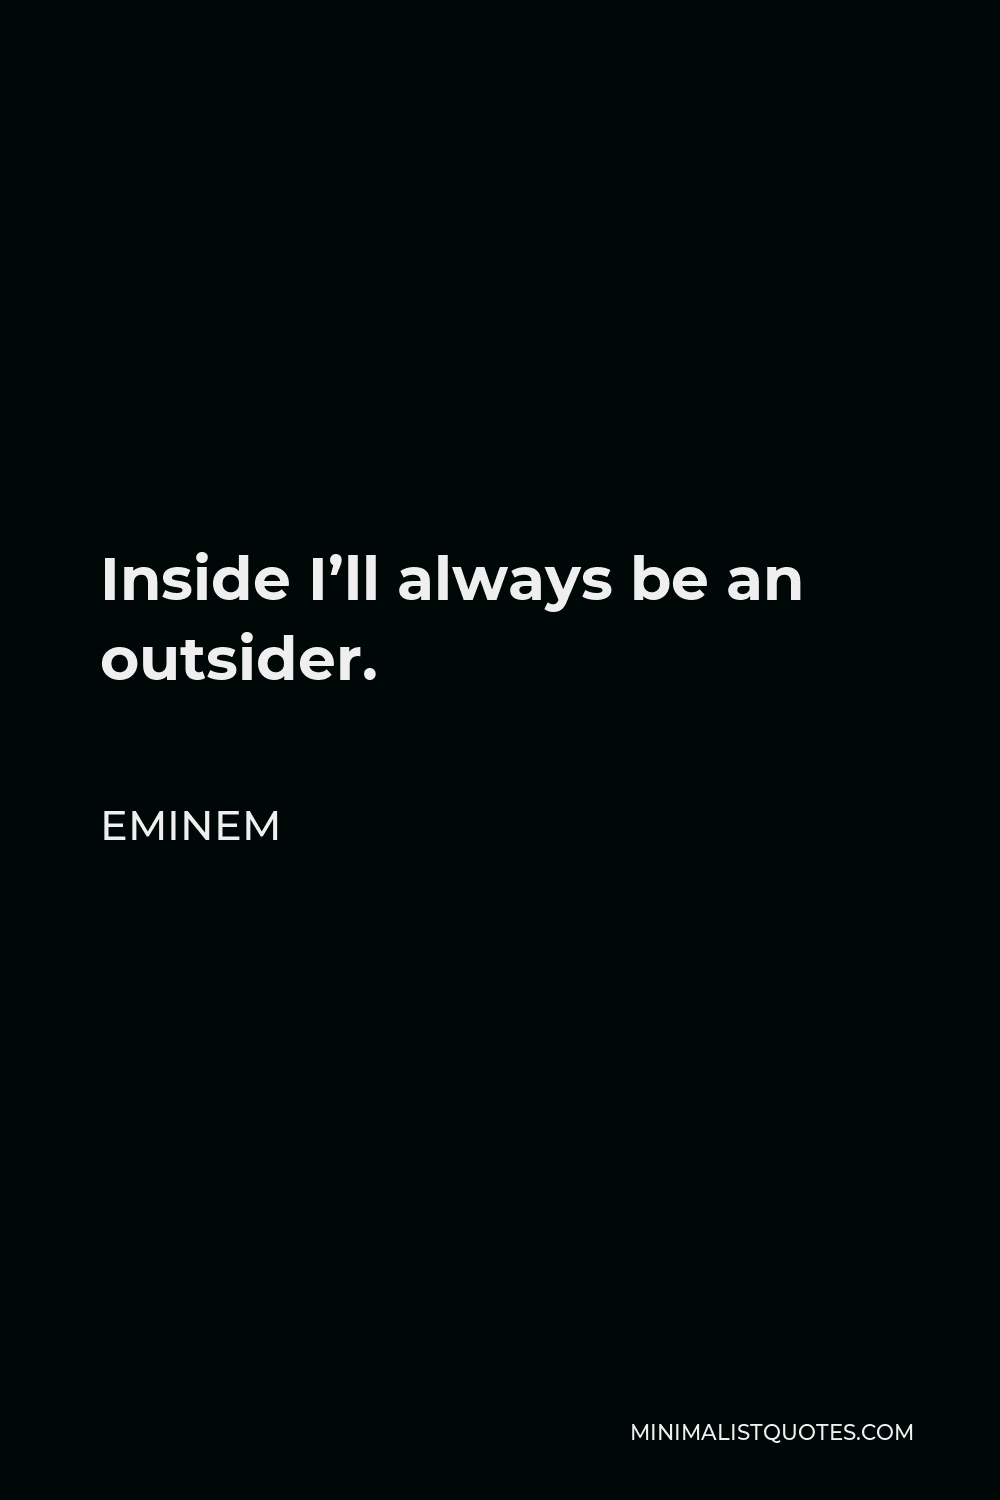 Eminem Quote - Inside I’ll always be an outsider.